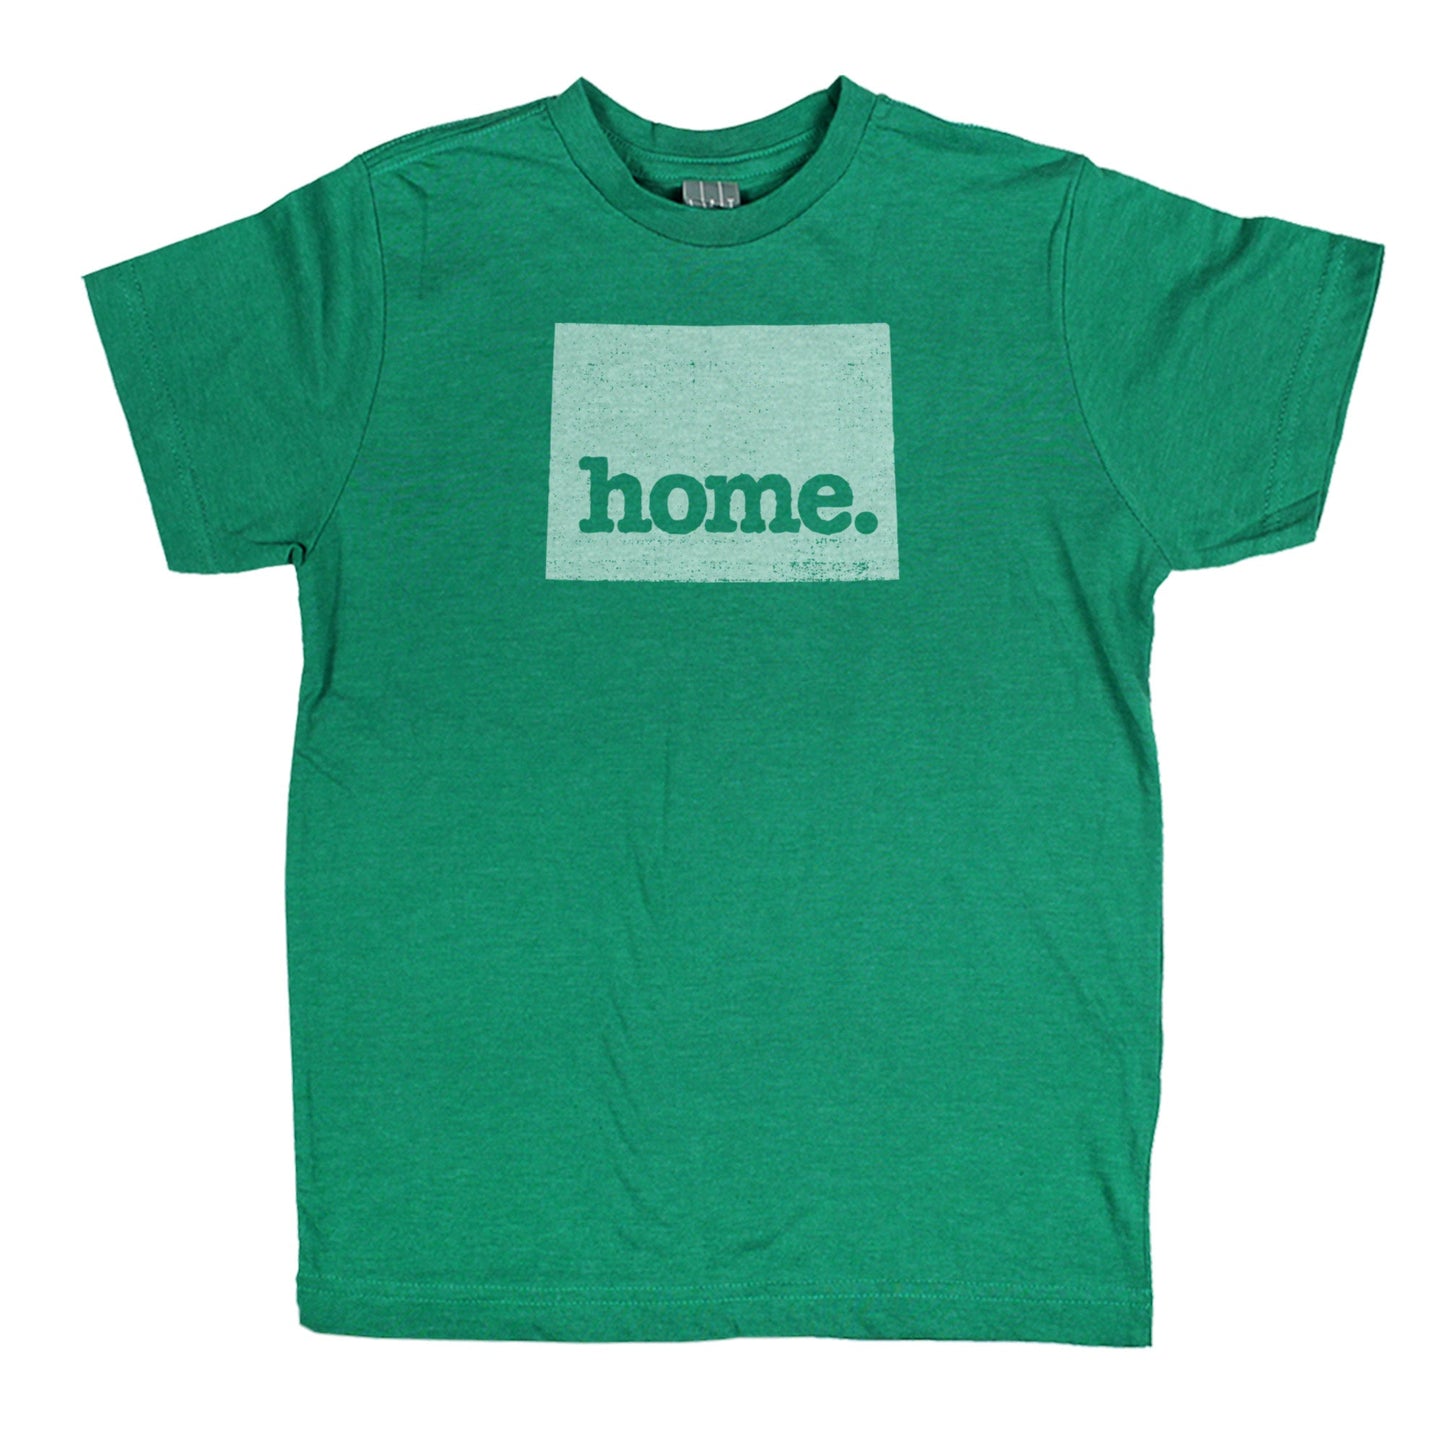 home. Youth/Toddler T-Shirt - Wyoming